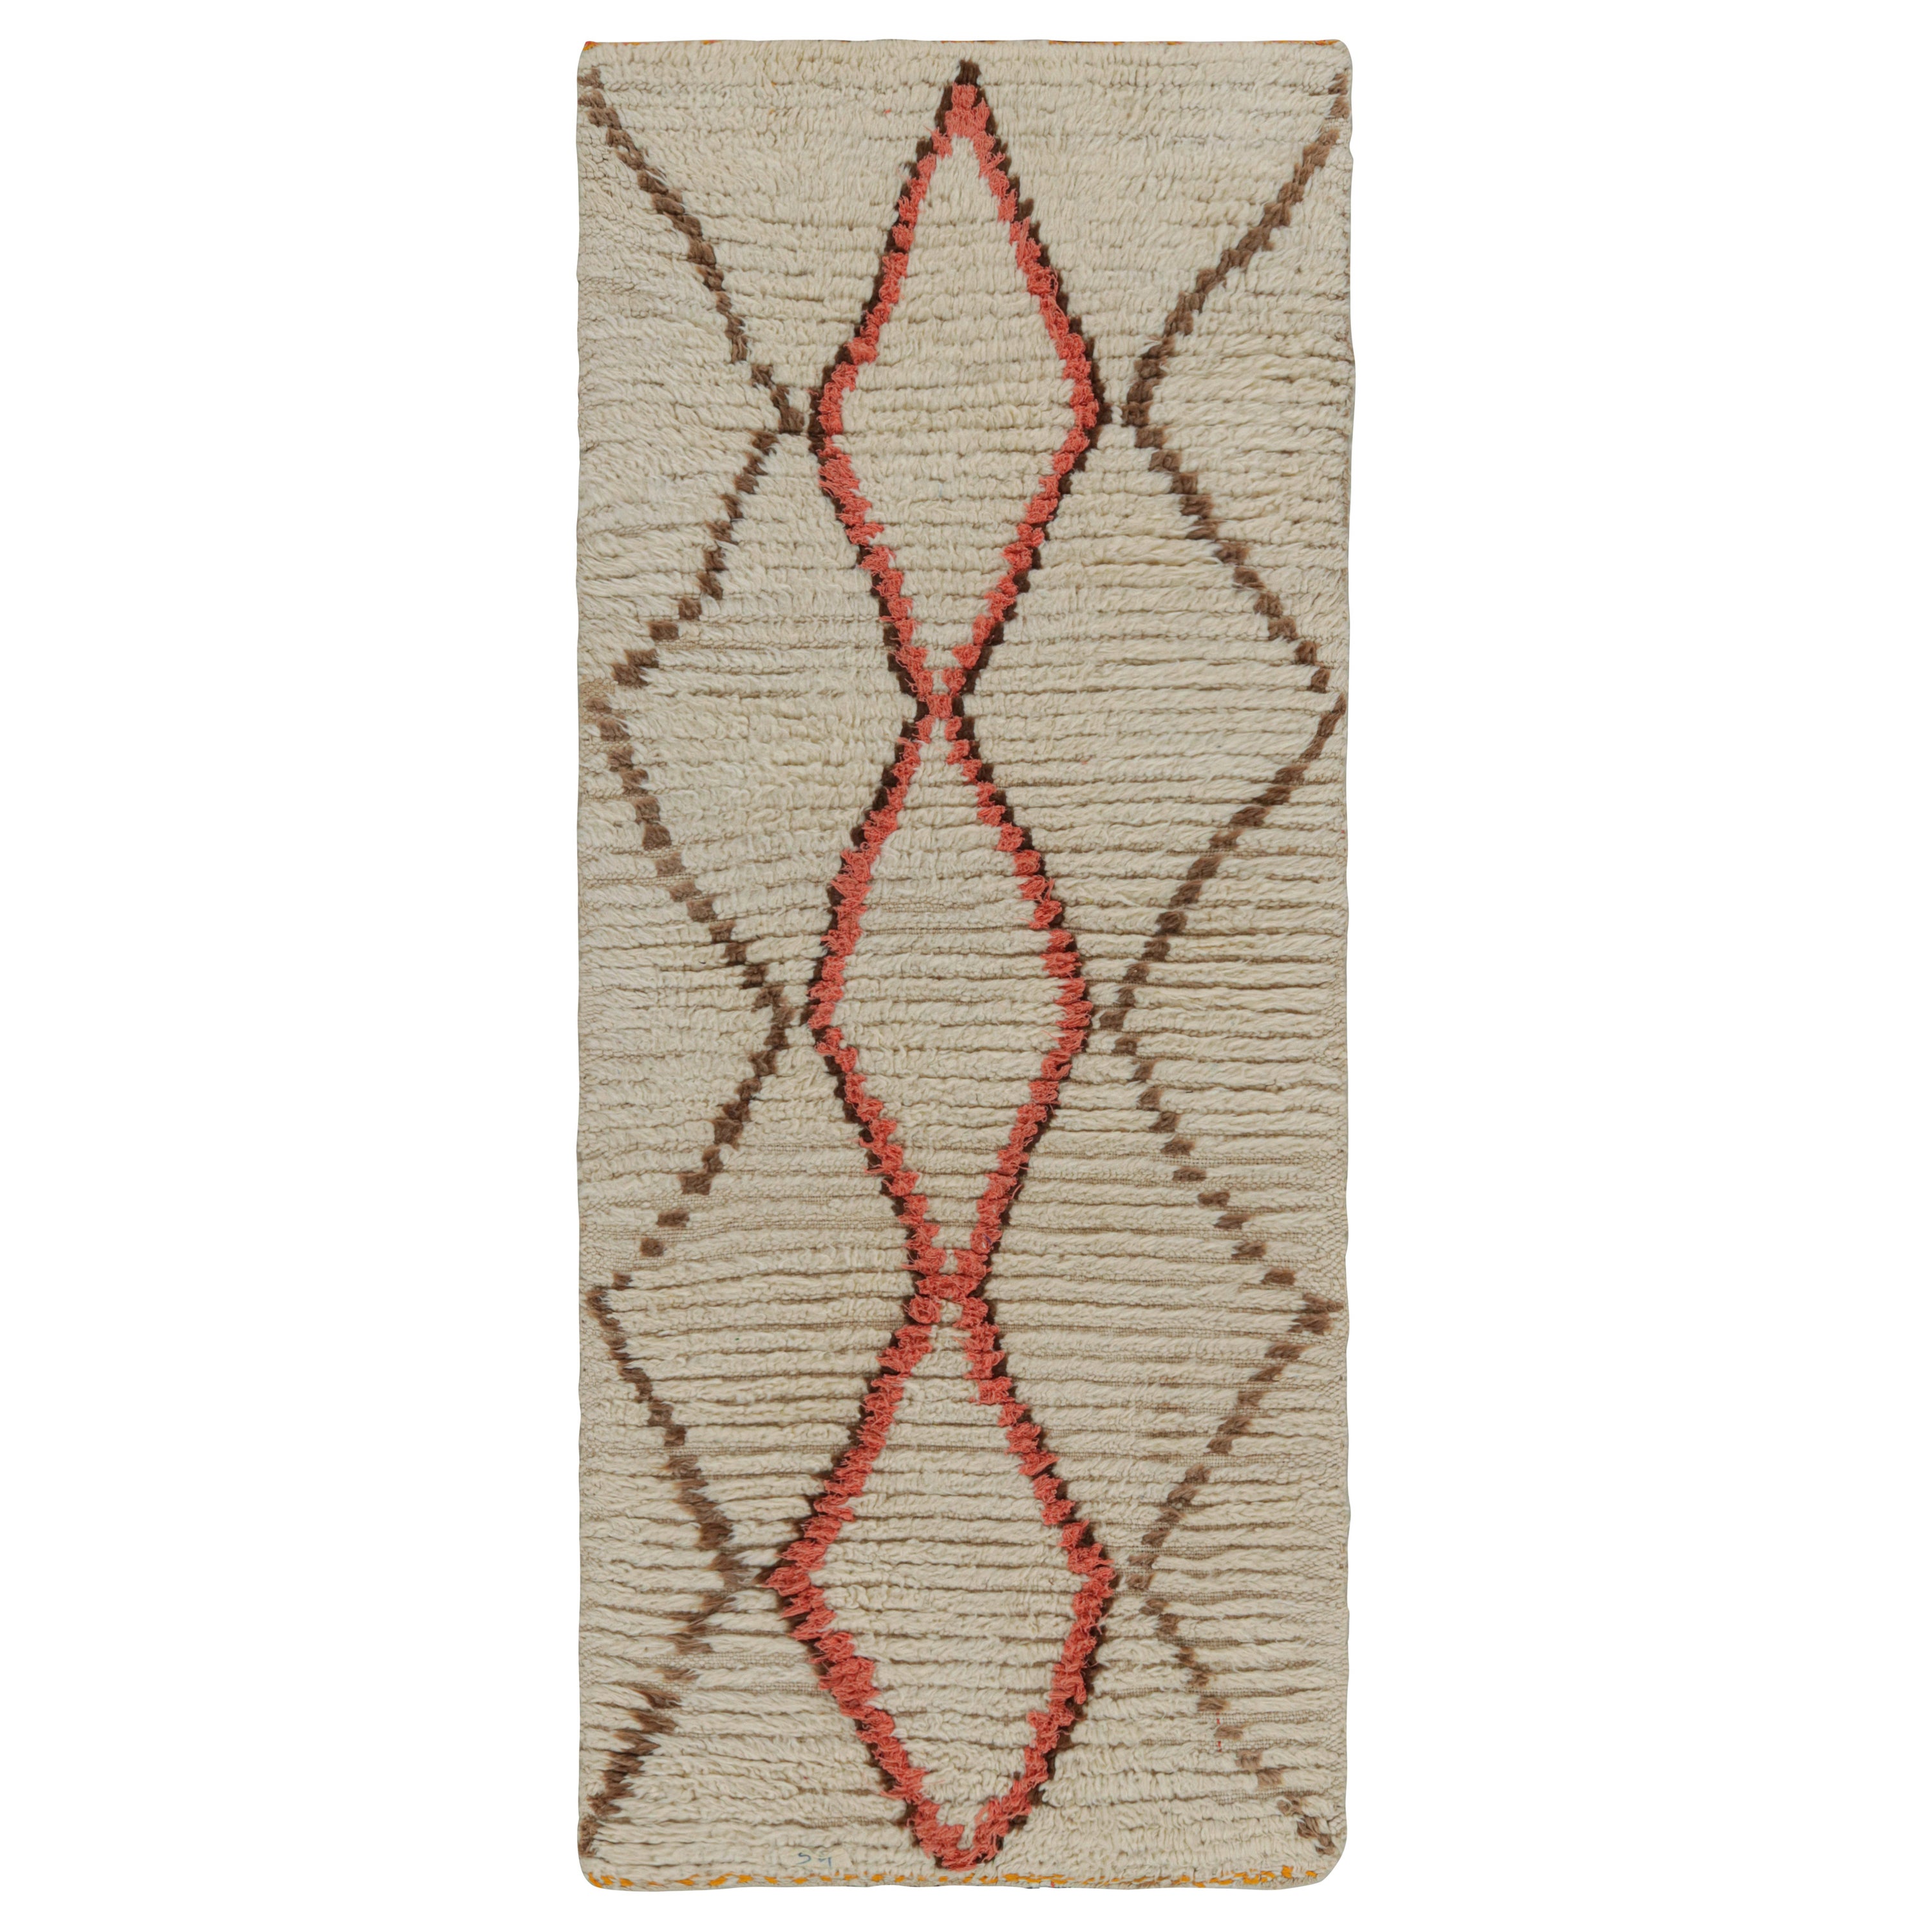 Vintage Azilal Moroccan runner in Beige with Red-Brown Patterns by Rug & Kilim